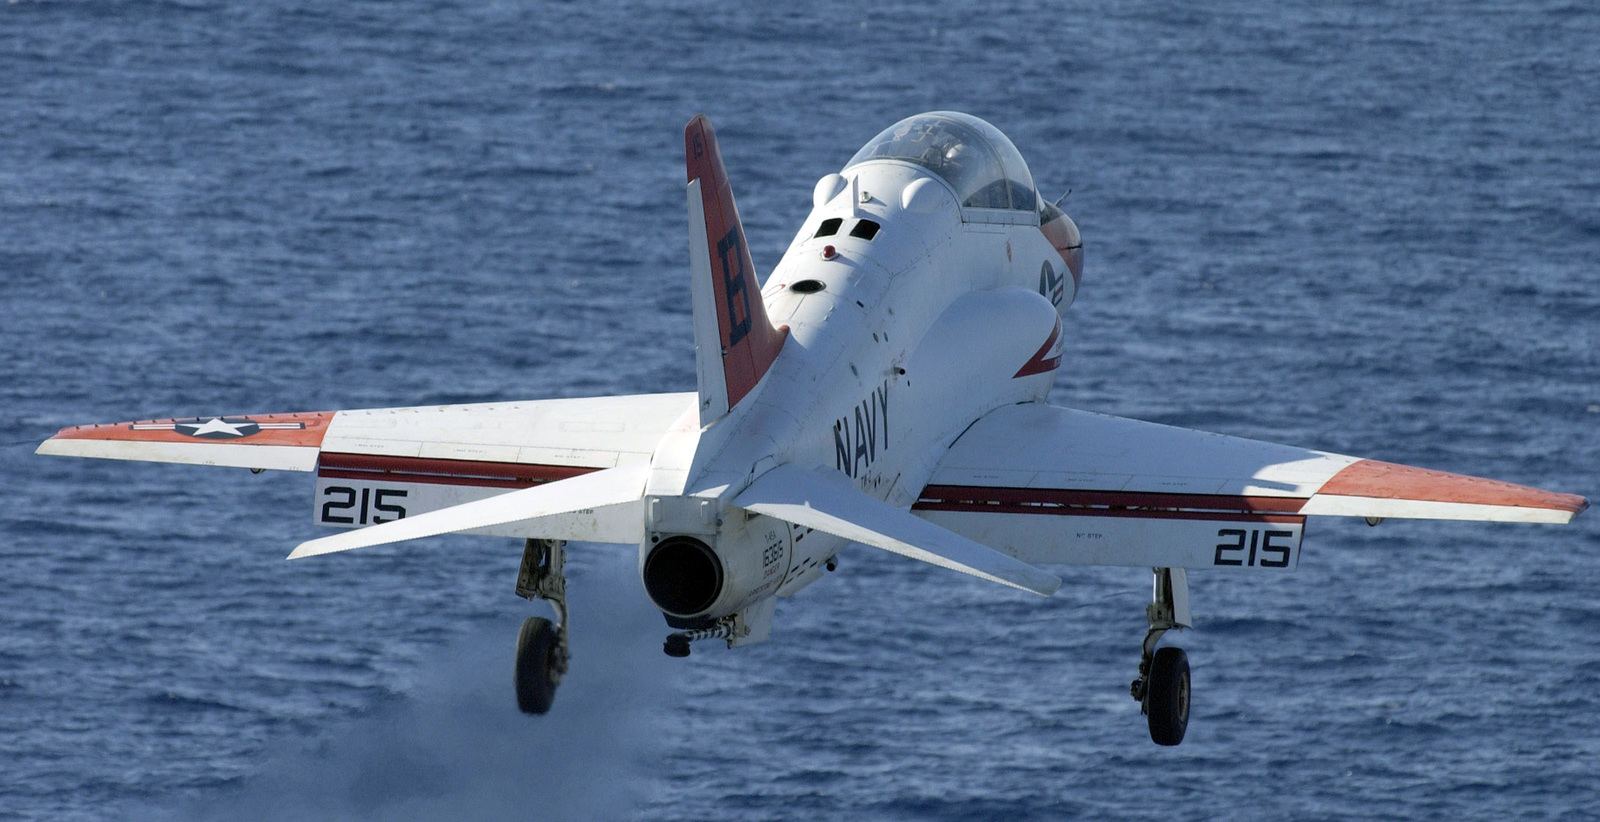 a-us-navy-t-45-goshawk-trainer-jet-launches-from-the-flight-deck-of-the-nimitz-0be521-1600.jpg